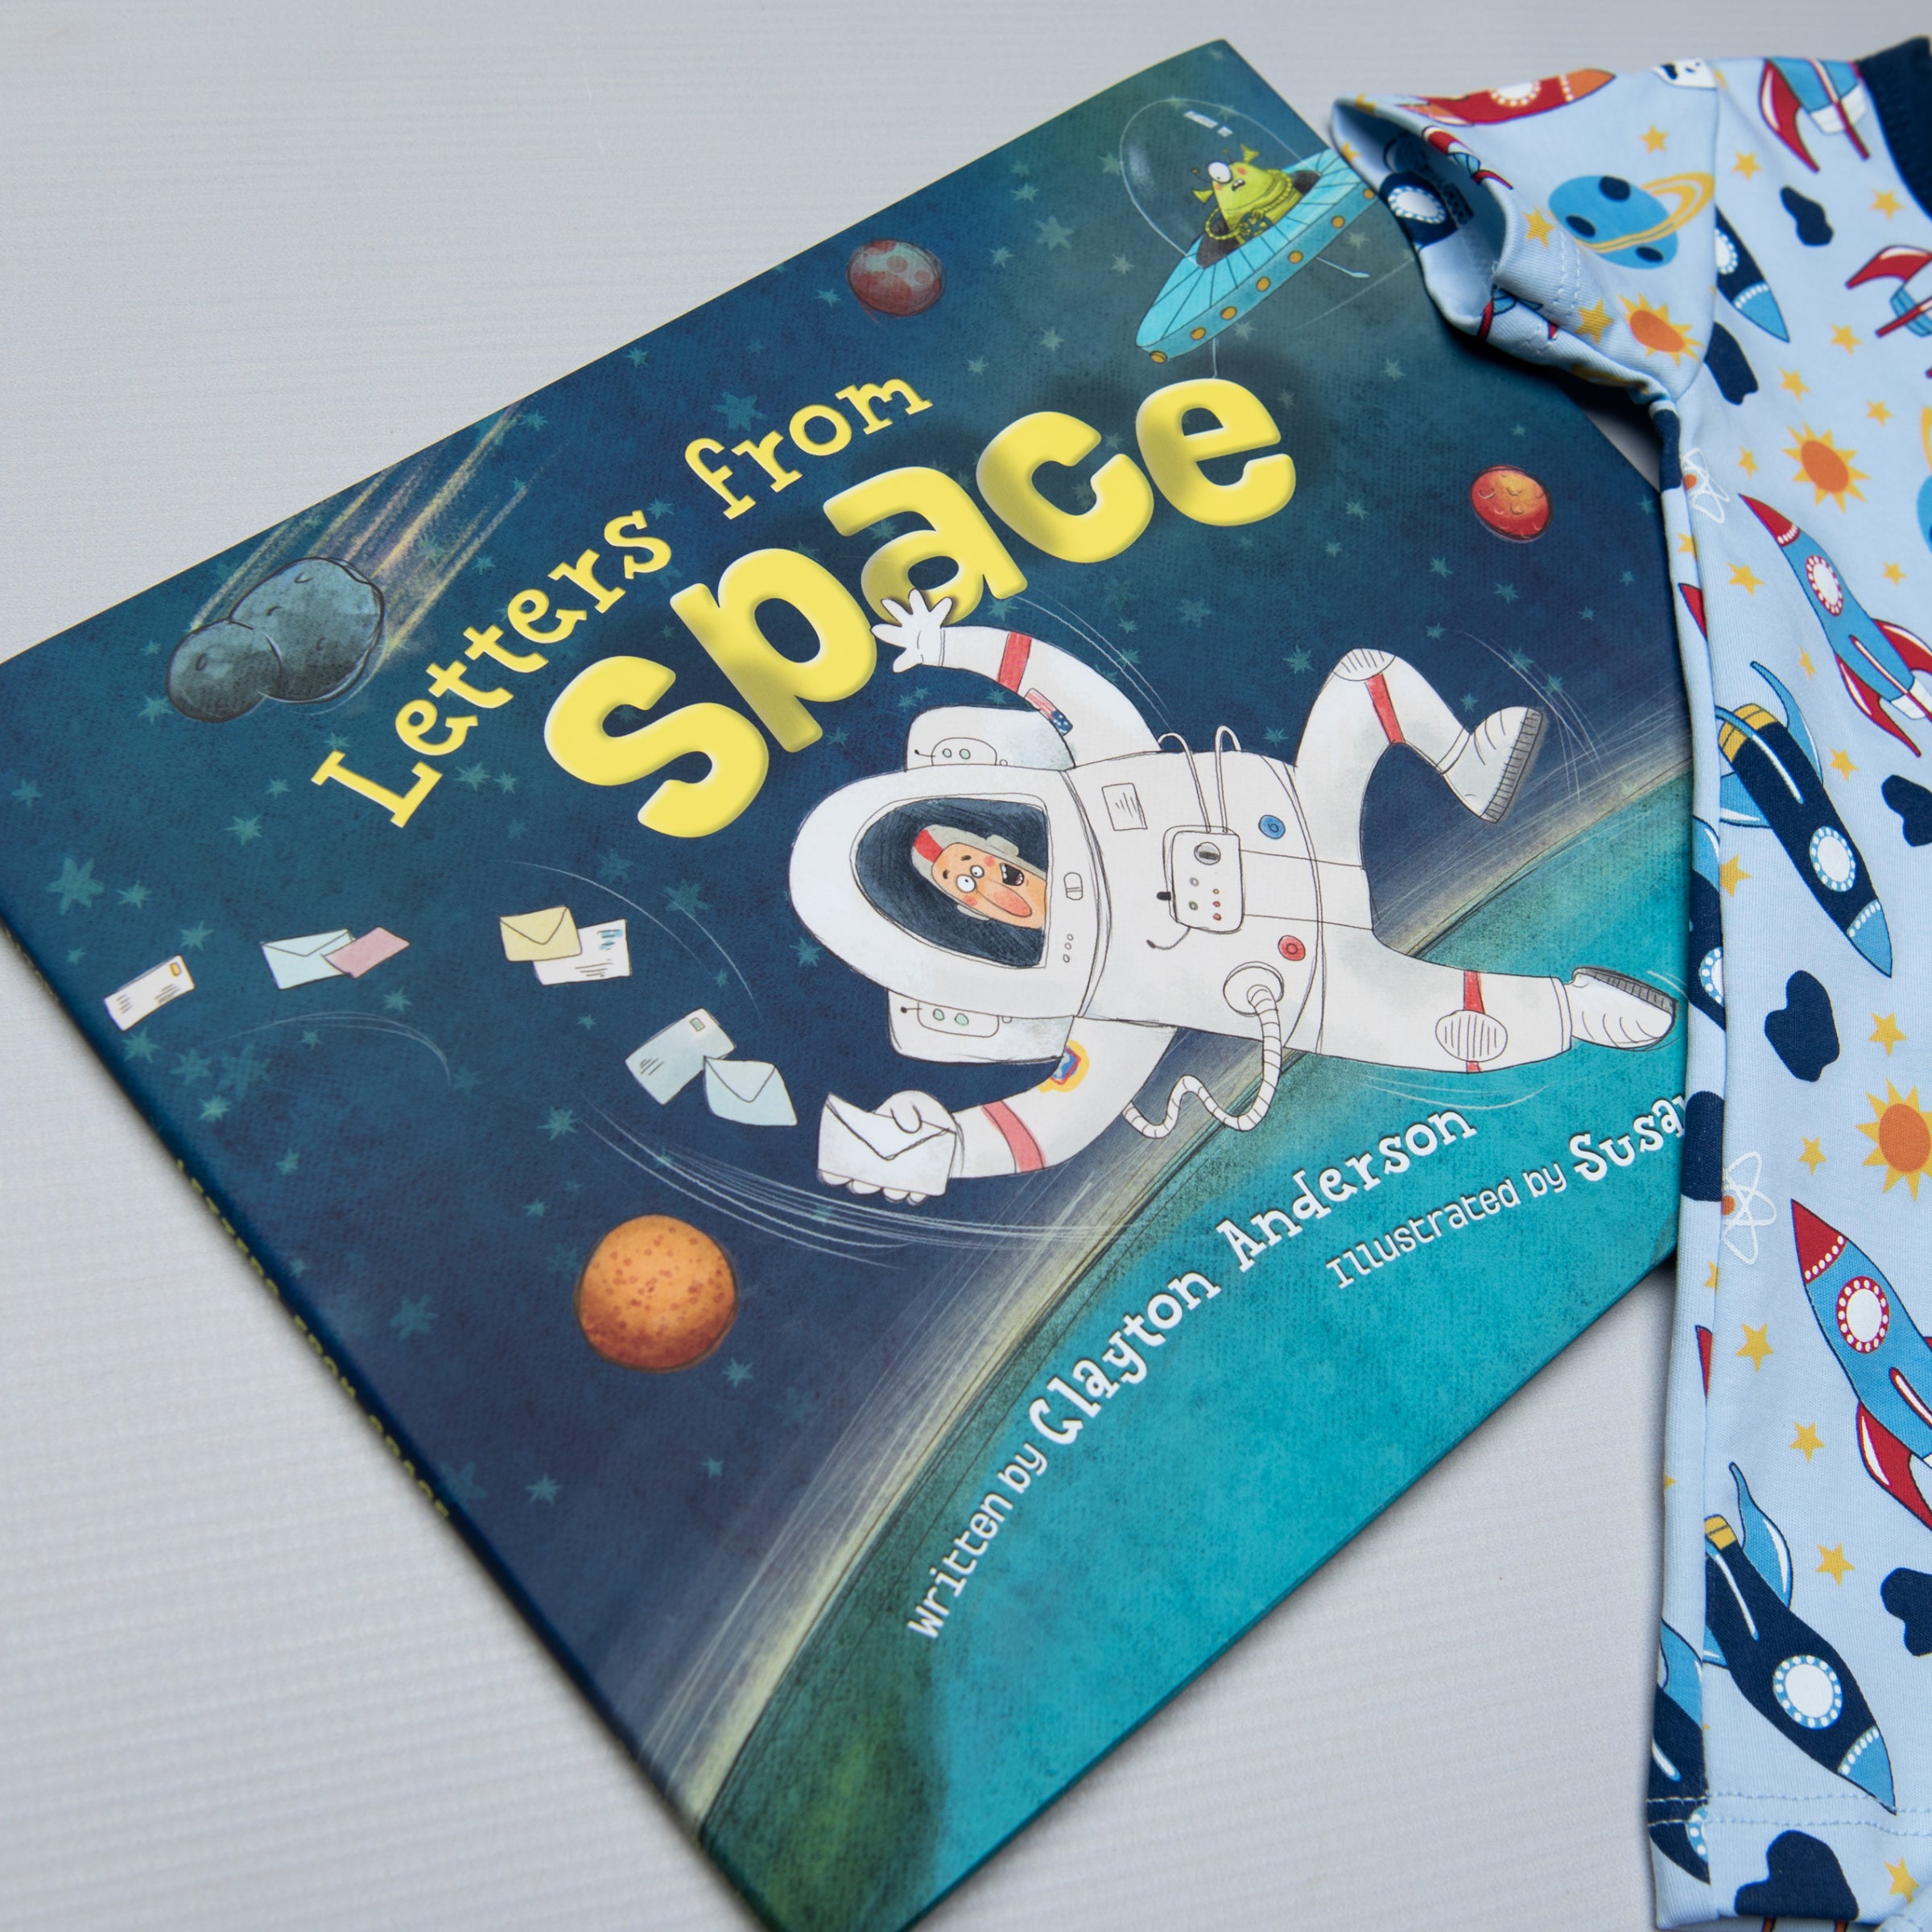 Letters from Space Book